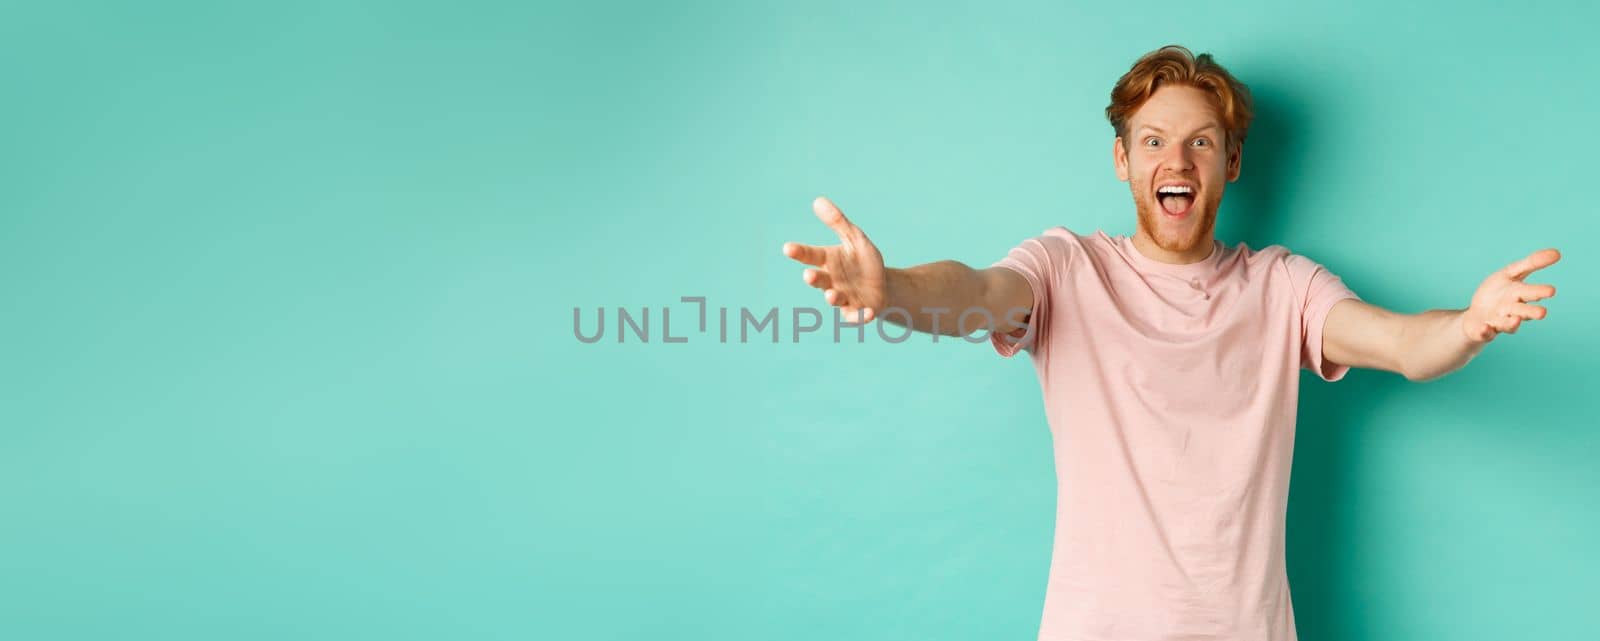 Friendly and happy young man with ginger hair, stretch out hands in warm welcome, reaching for hug and smiling joyfully, standing in t-shirt over mint background.